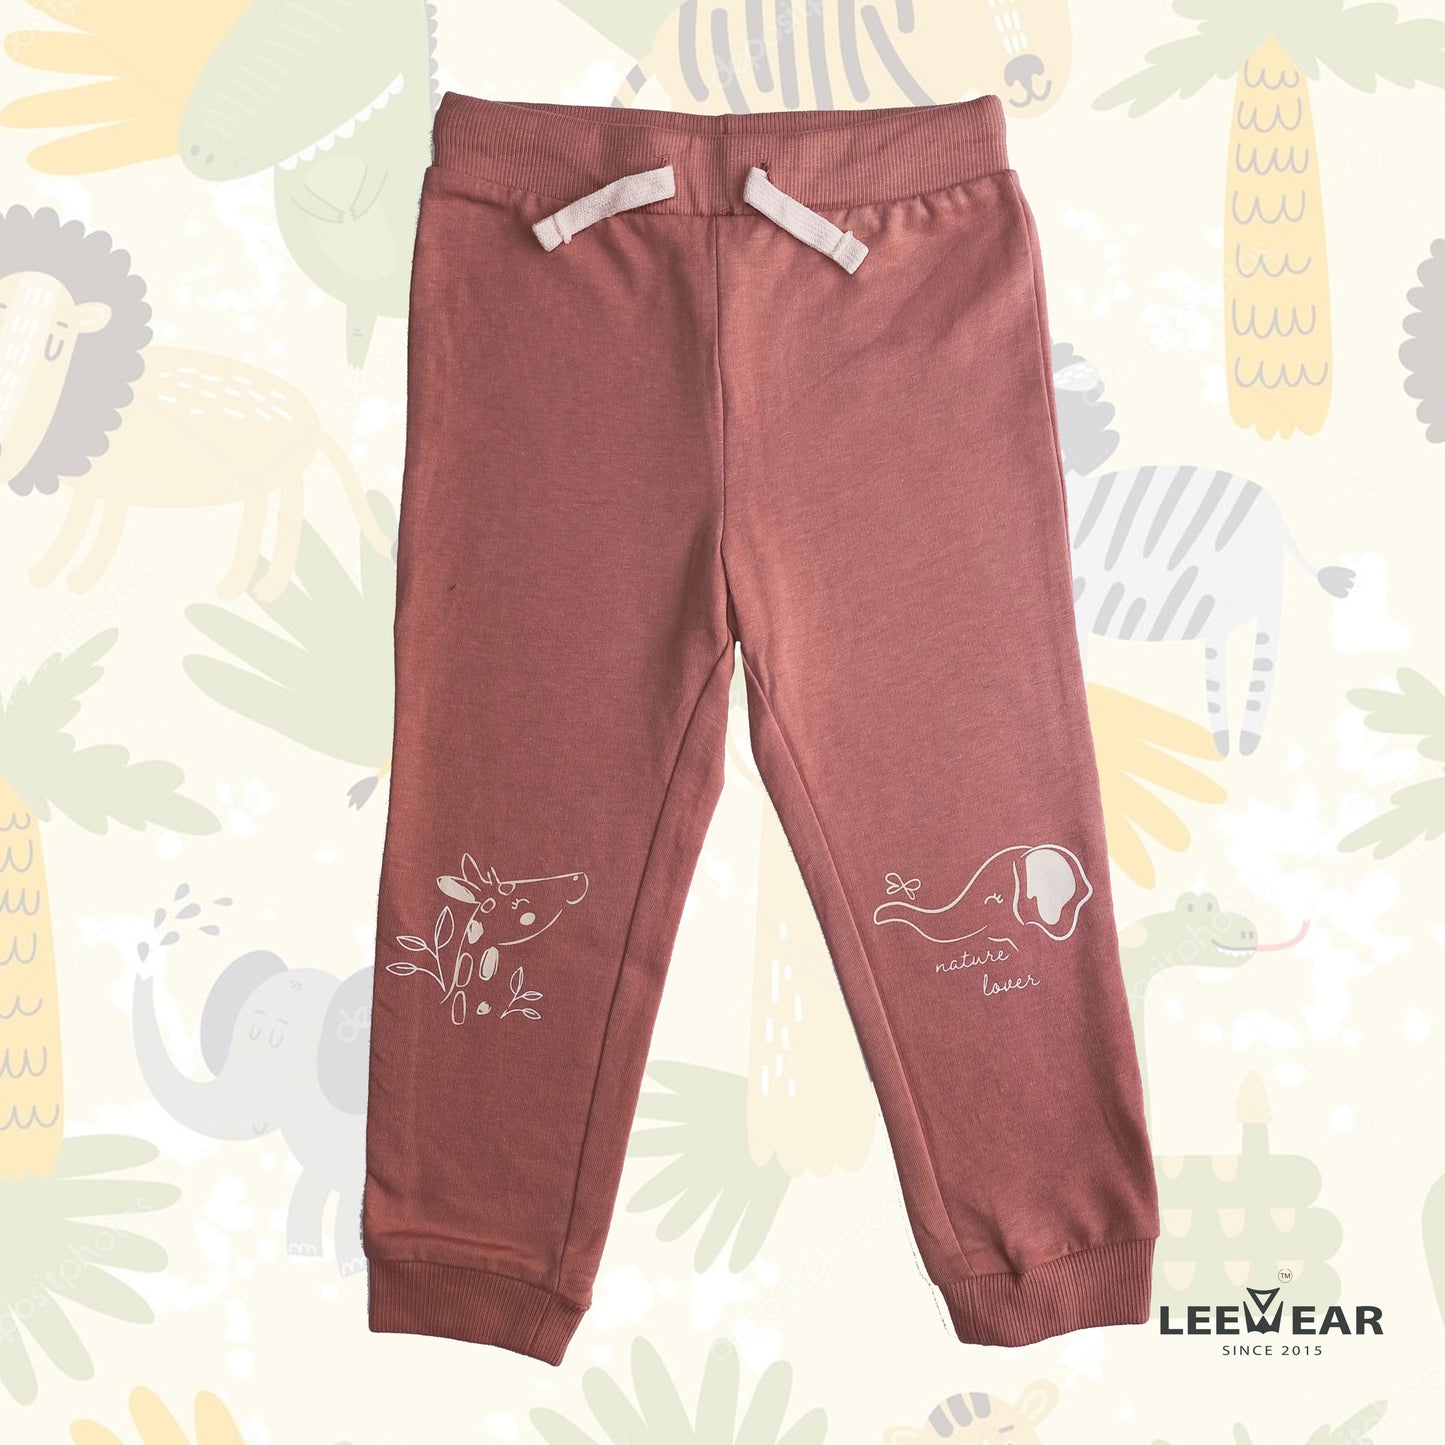 Winter Wonderland: Kids' Printed Terry Fabric Trousers for Cozy Comfort TR21101